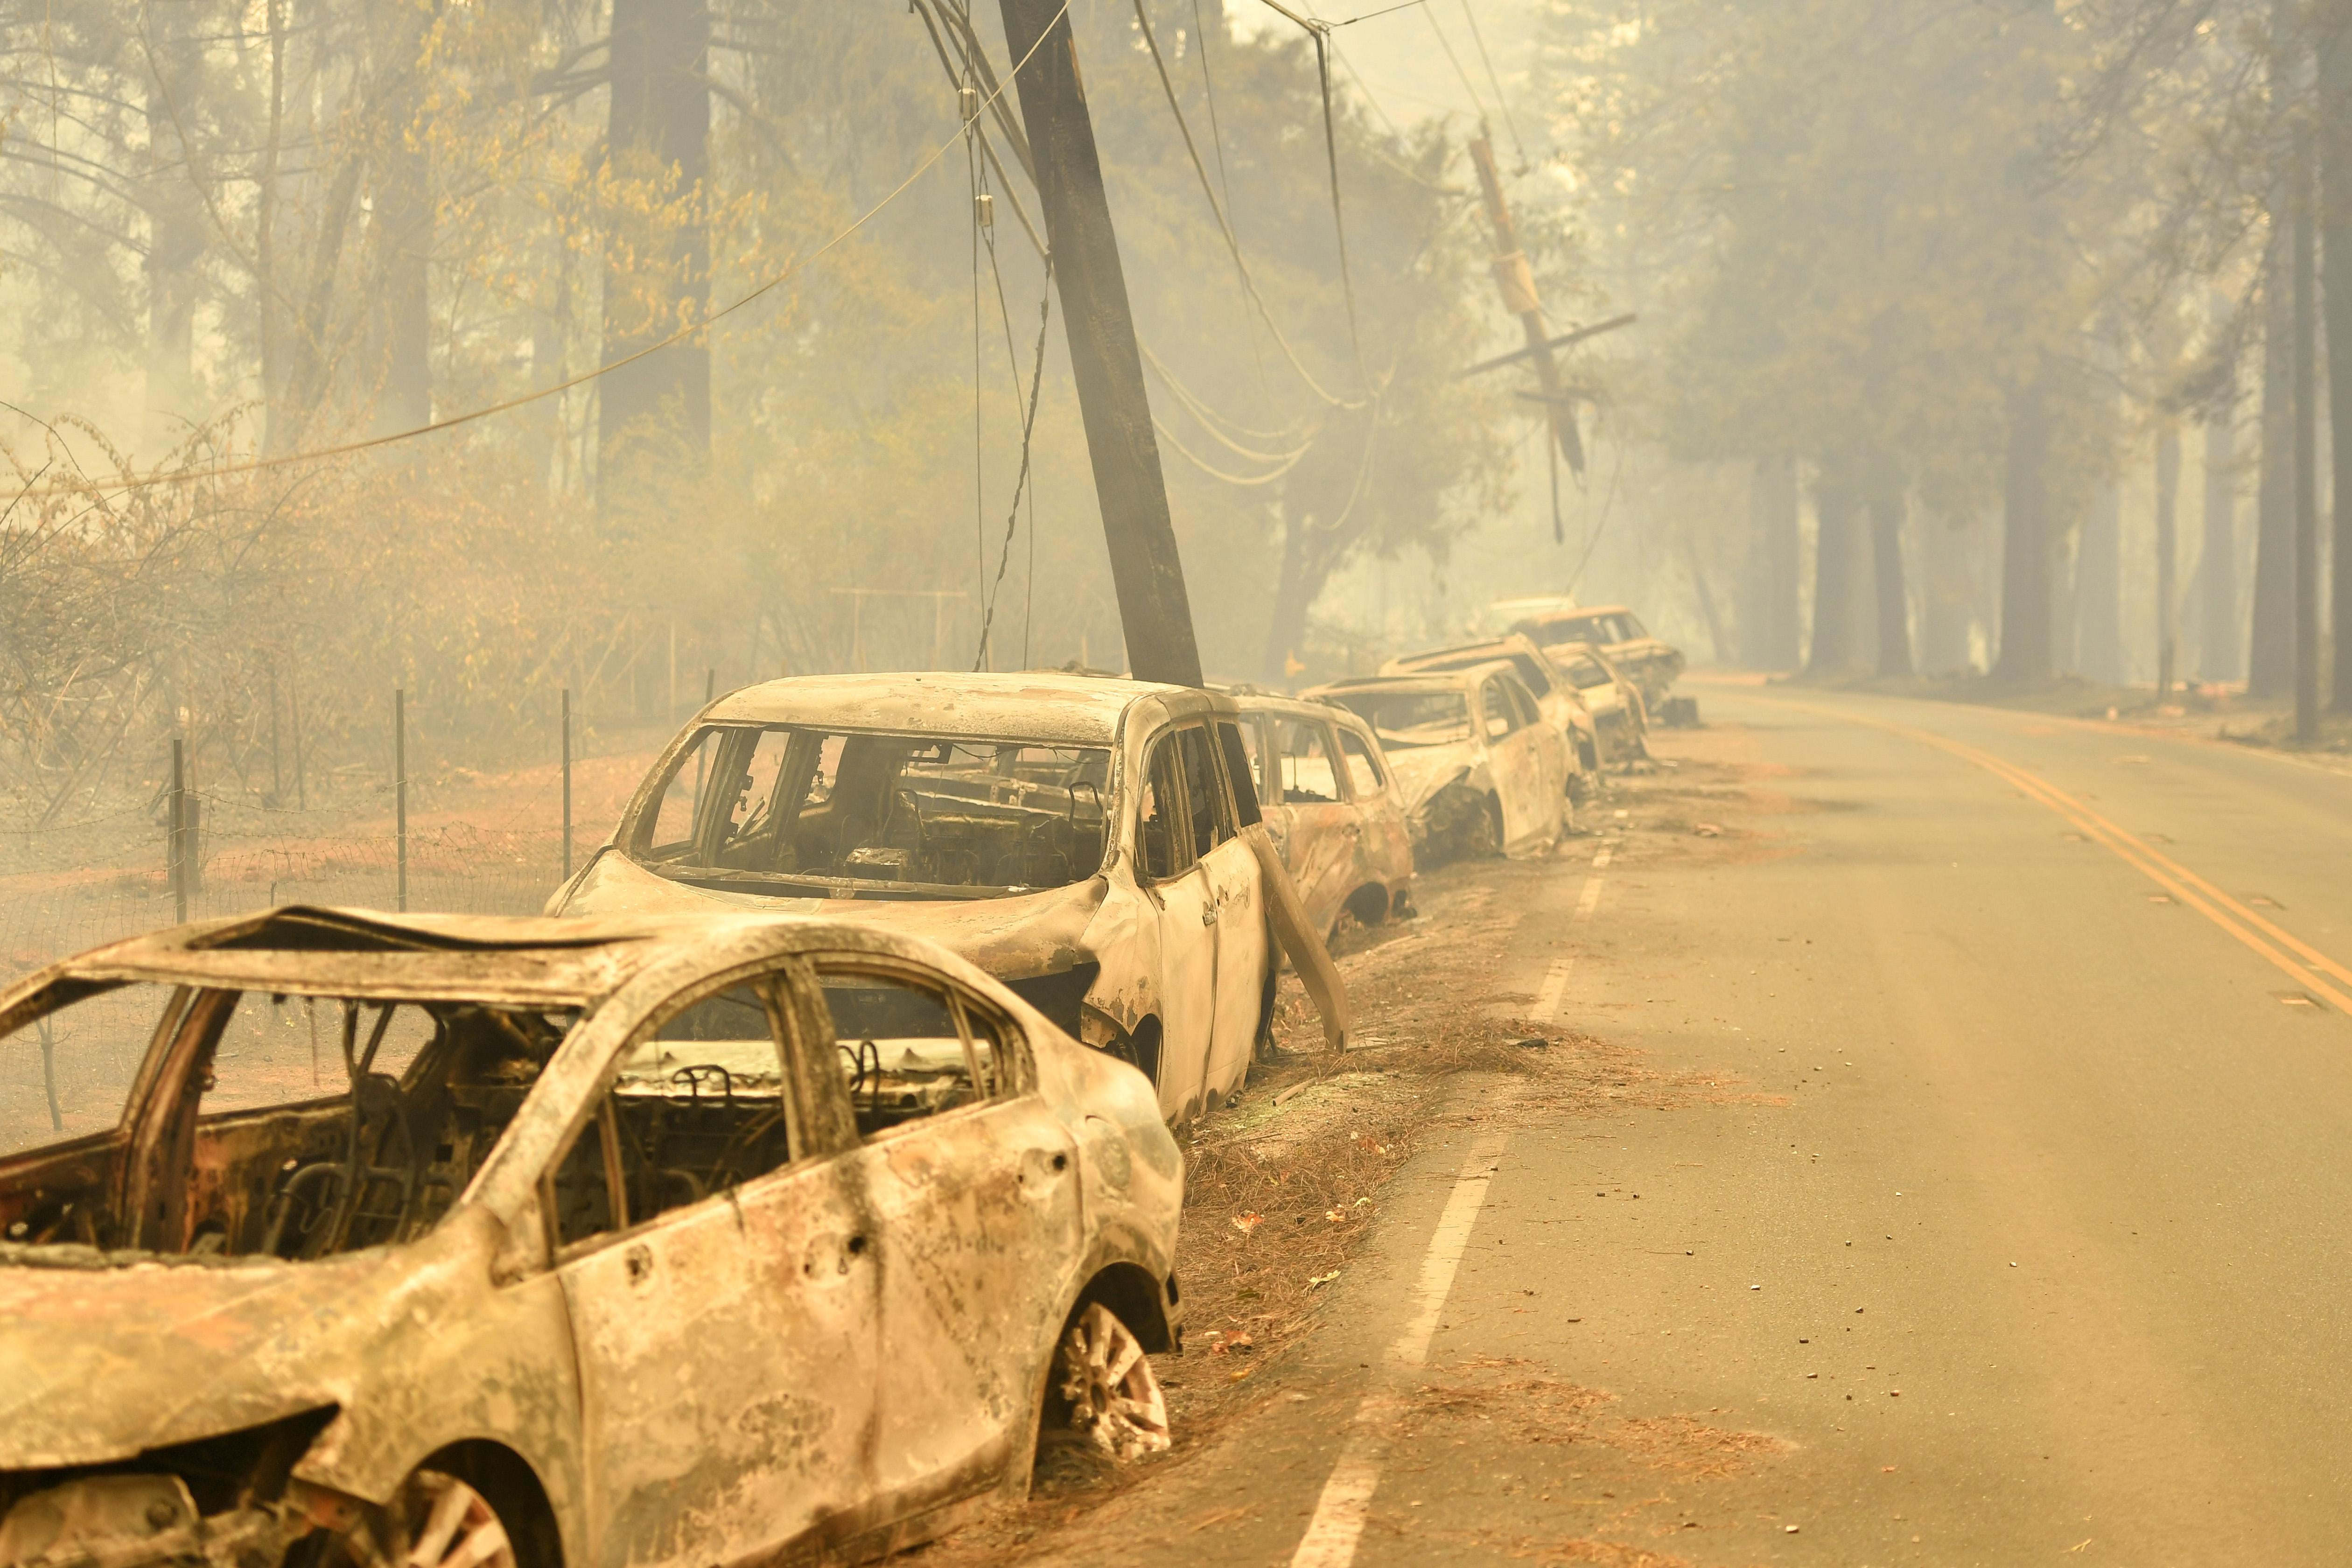 Burned vehicles on the side of a road ravaged by wildfire.